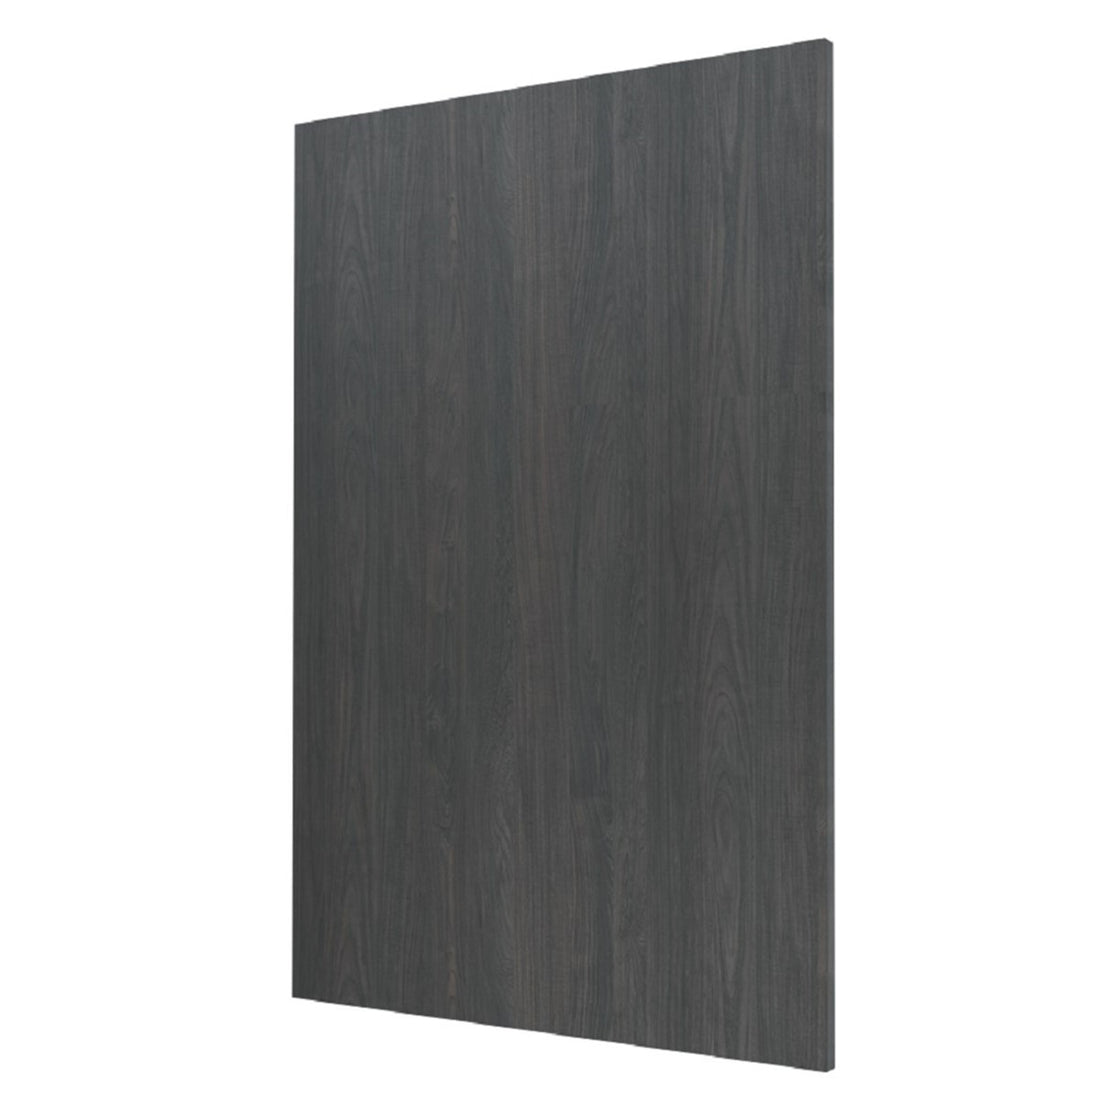 Carbon Marine Slab Style Wall Kitchen Cabinet End Panel (12 in W x 0.75 in D x 30 in H) -  Pro-Edge HD